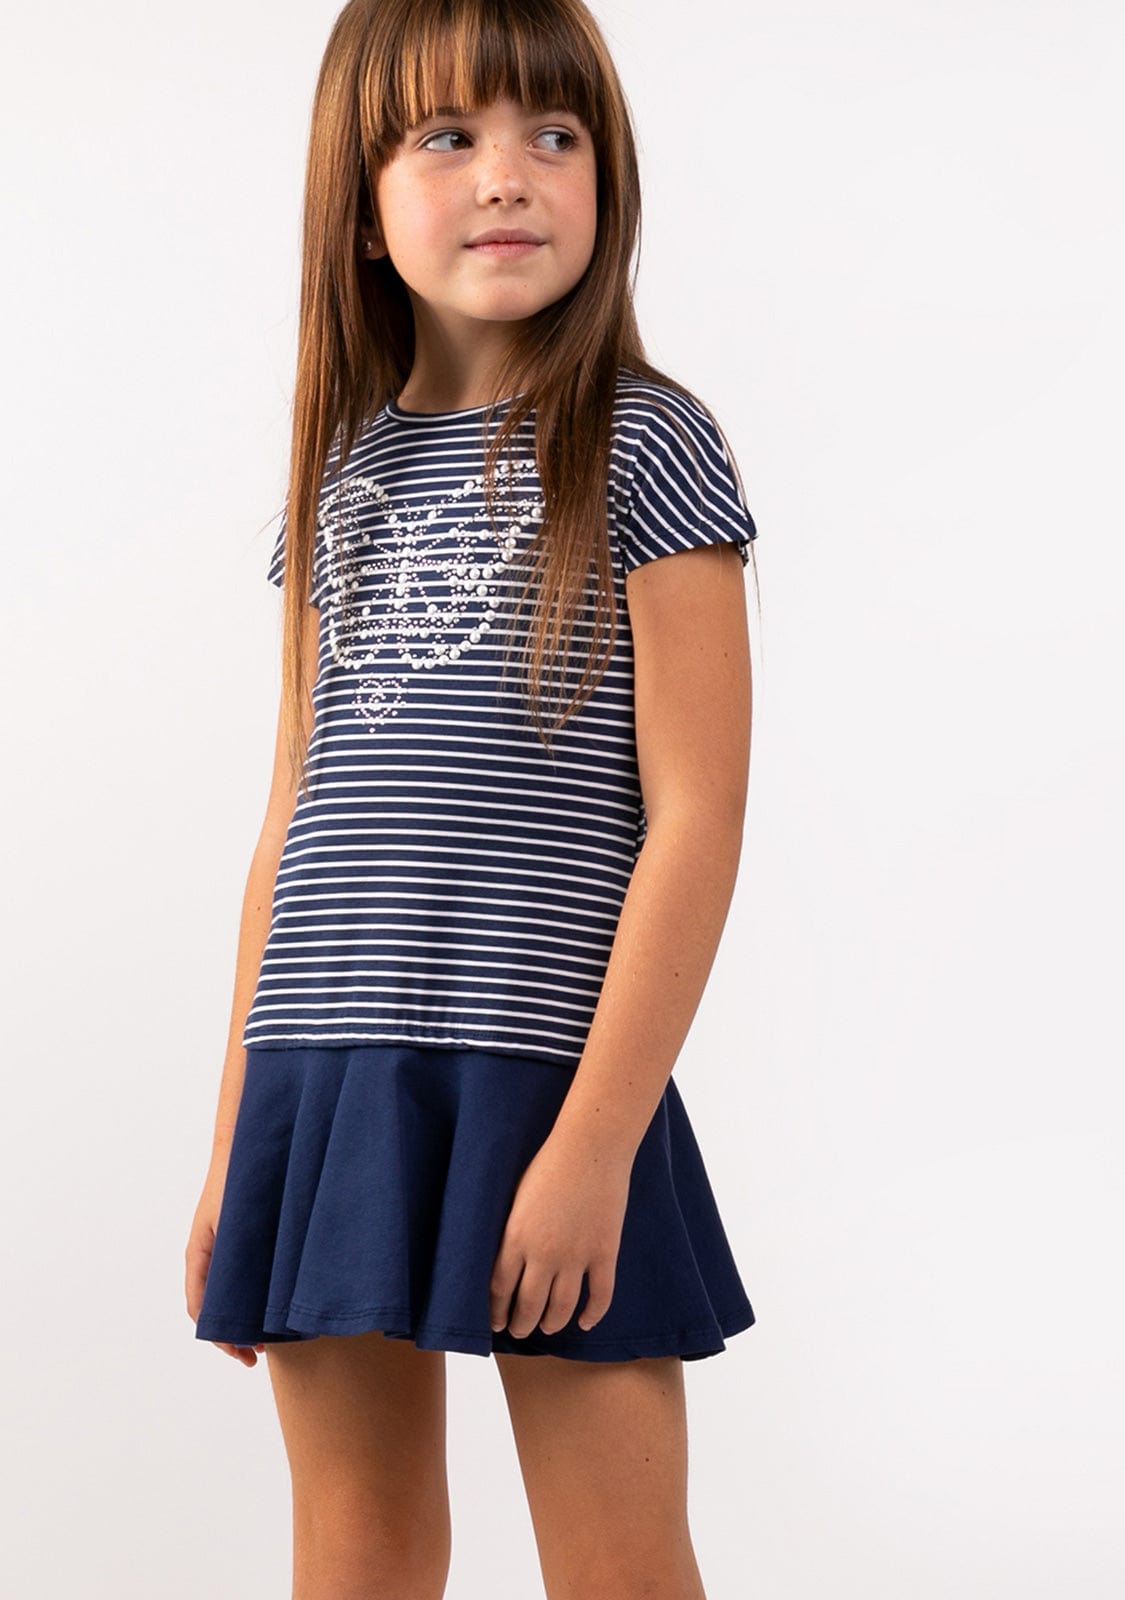 CONGUITOS TEXTIL Clothing Girl's Navy Butterfly Stripes Dress